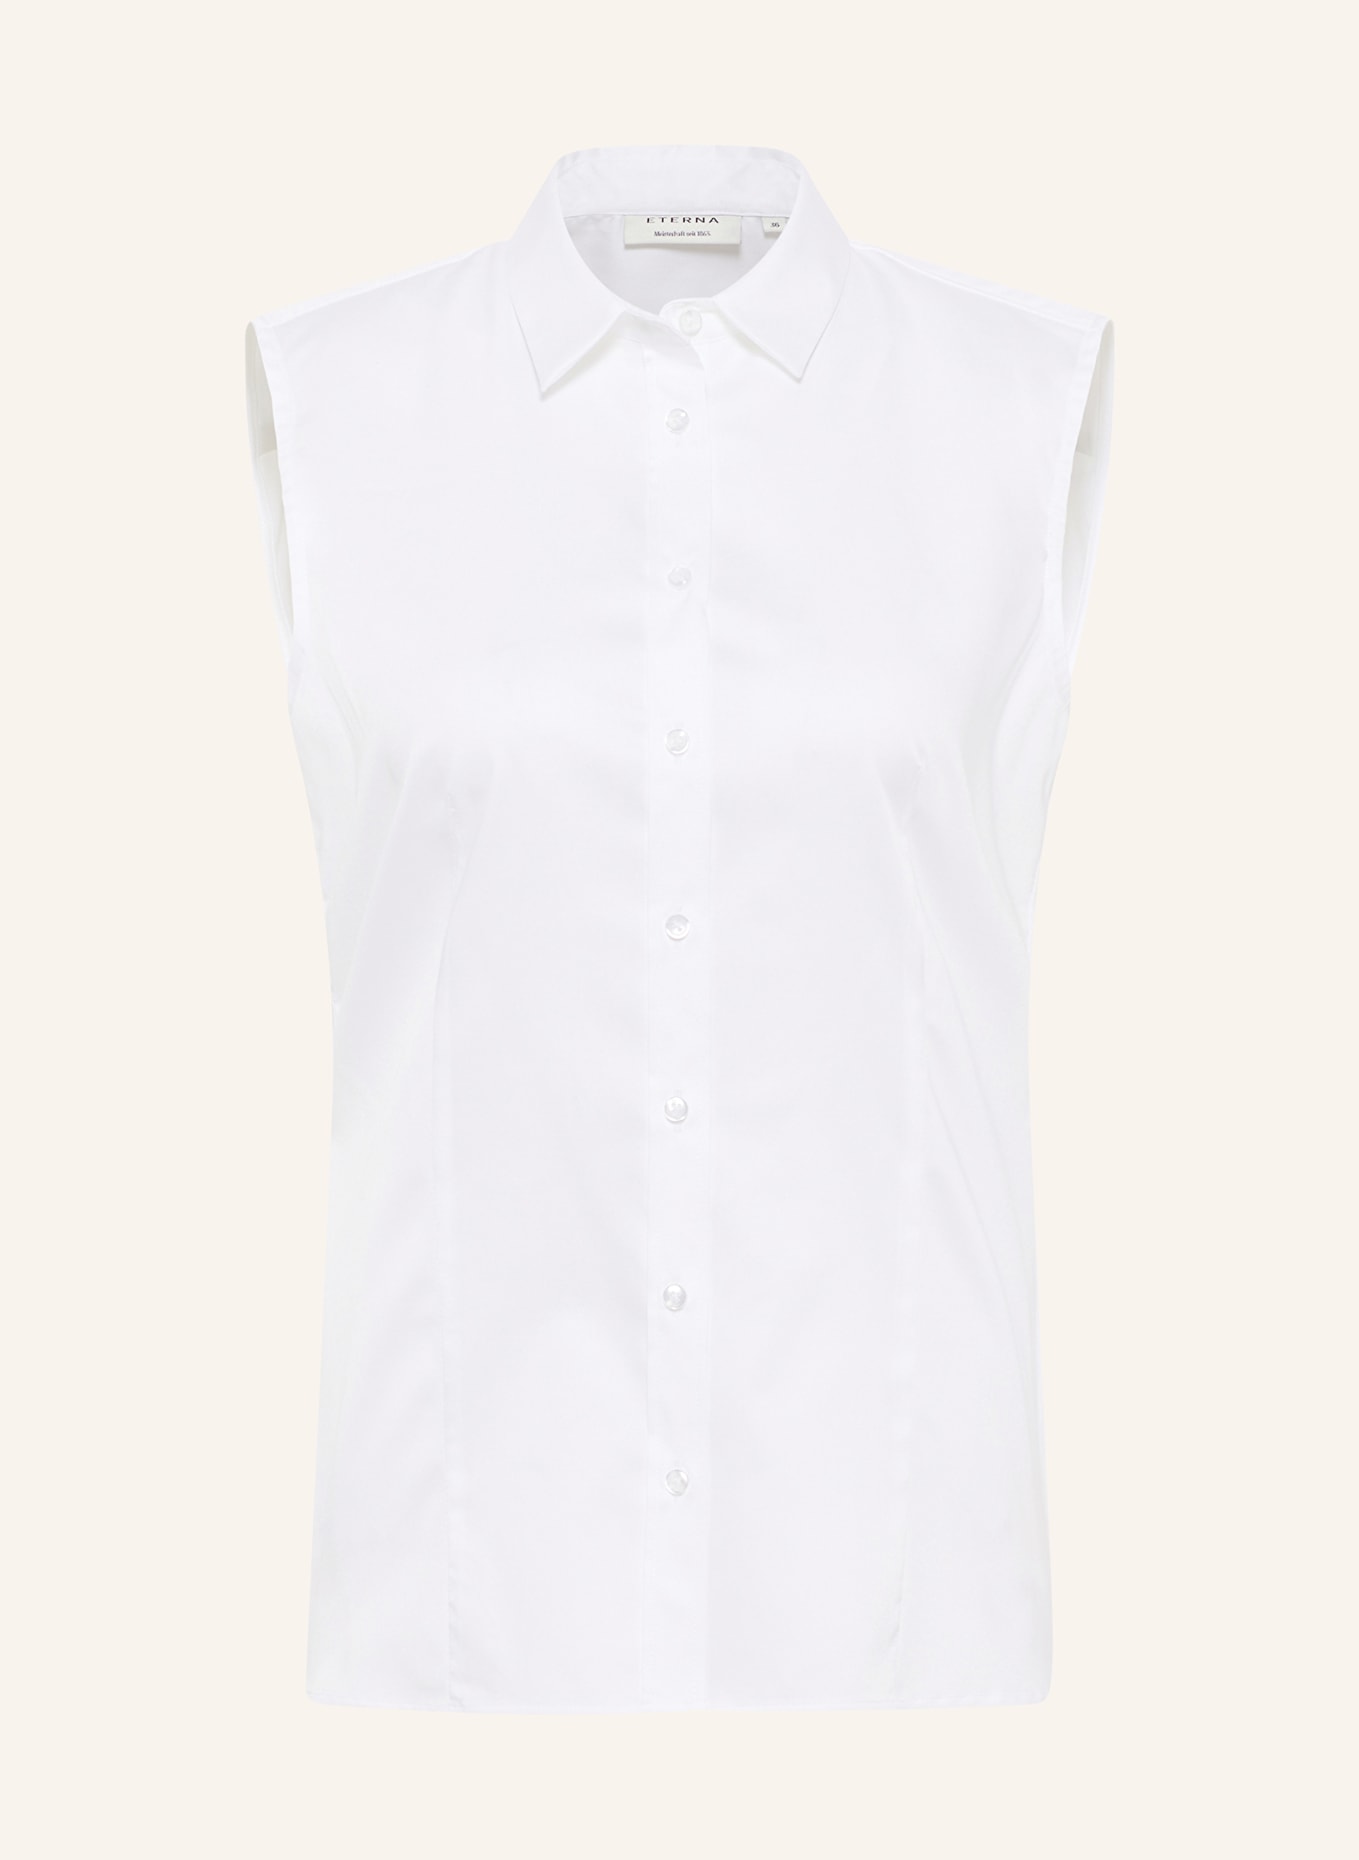 ETERNA Blouse top, Color: WHITE (Image 1)